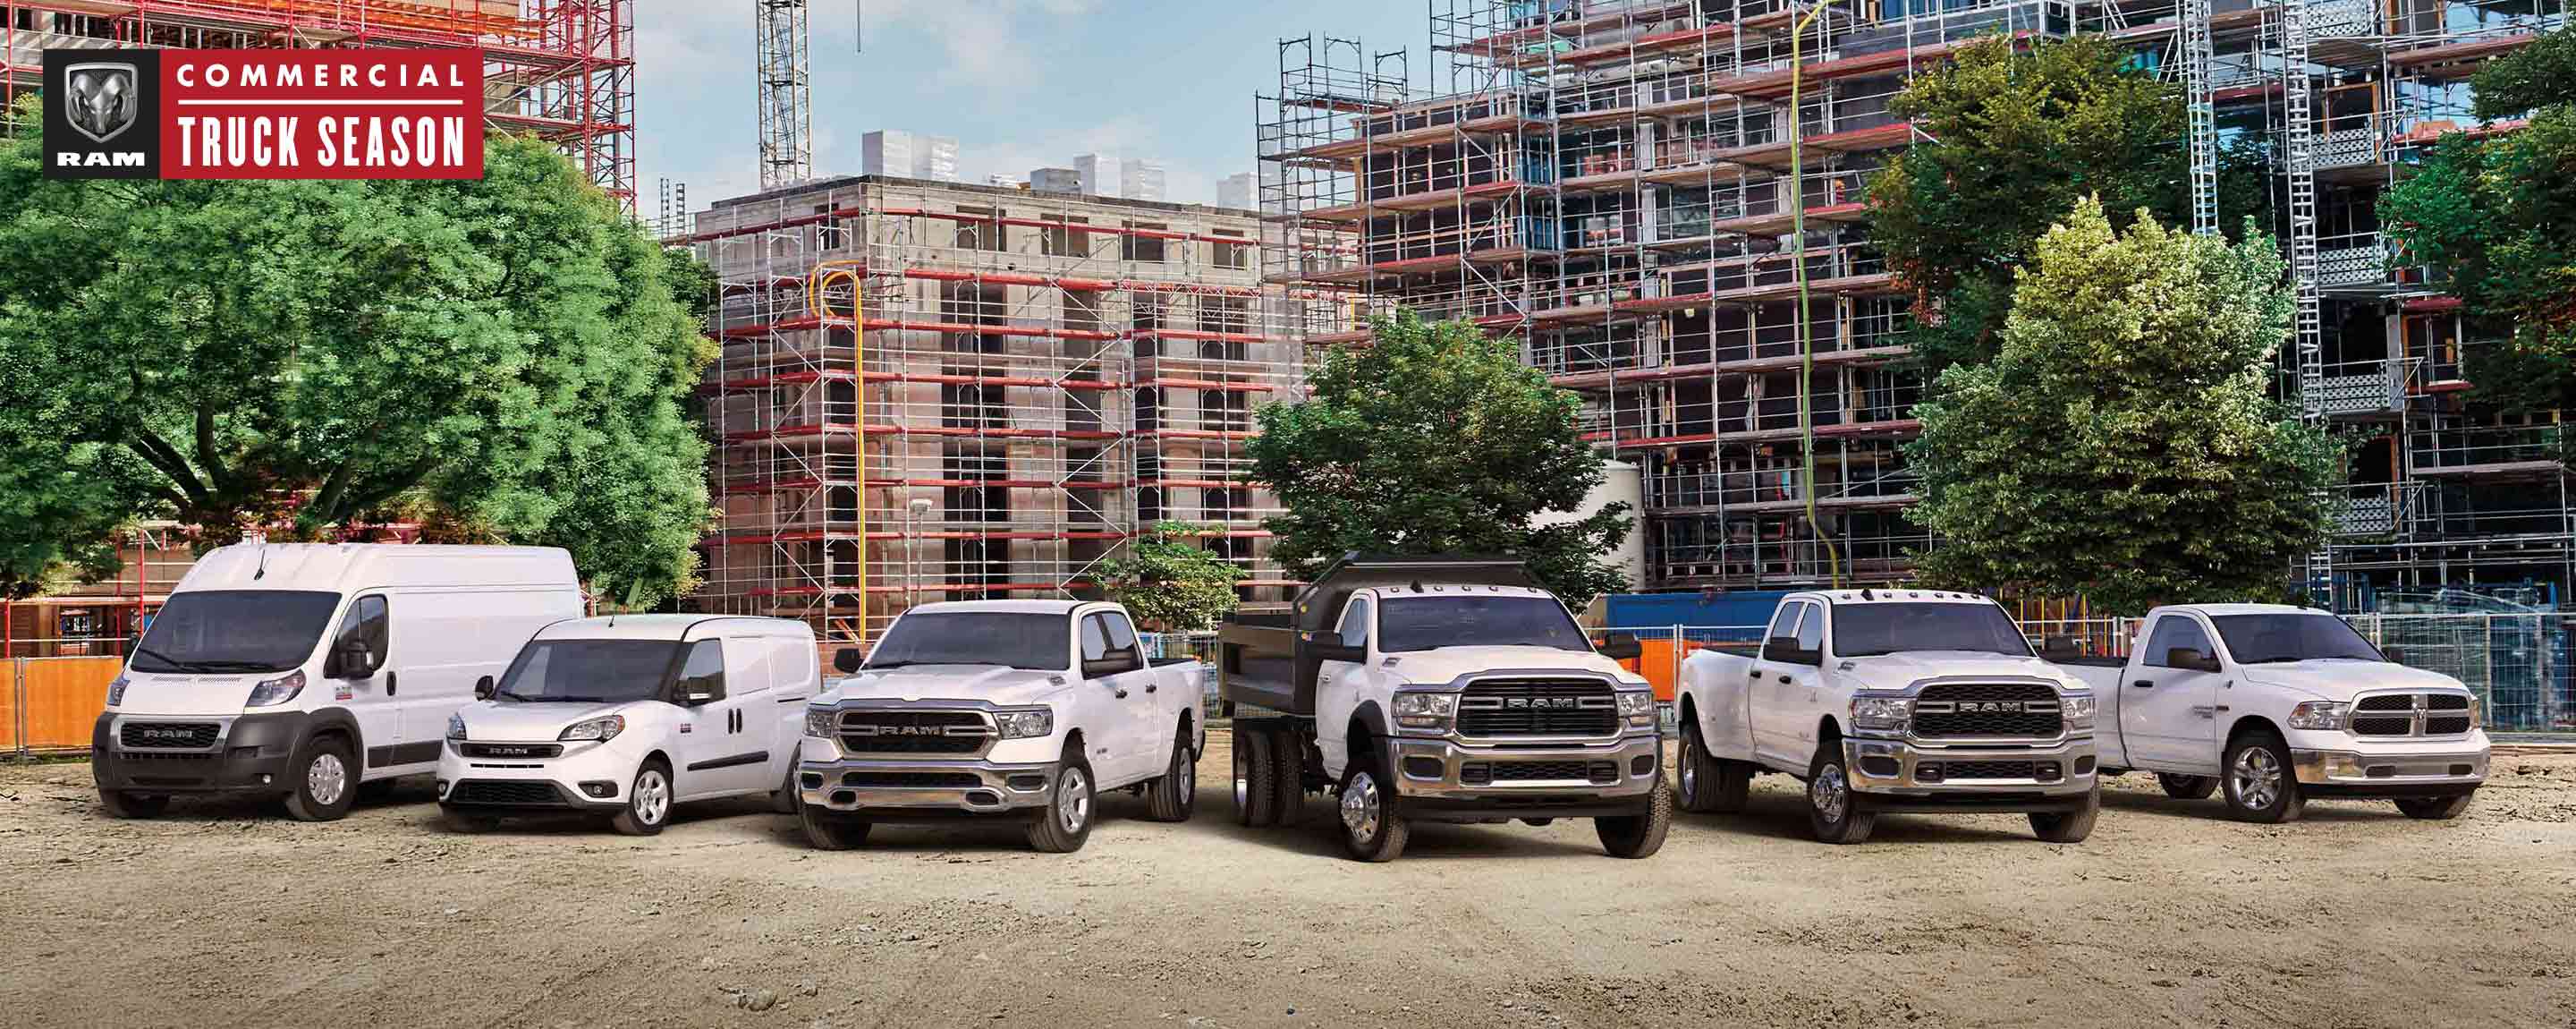 Ram Commercial Truck season. The 2021 Ram lineup parked at a massive commercial construction site. From left to right: a Ram ProMaster High Roof, Ram ProMaster City Cargo Van, Ram 1500, Ram 5500 Chassis Cab with dump body, Ram 3500 and Ram 1500 Classic.